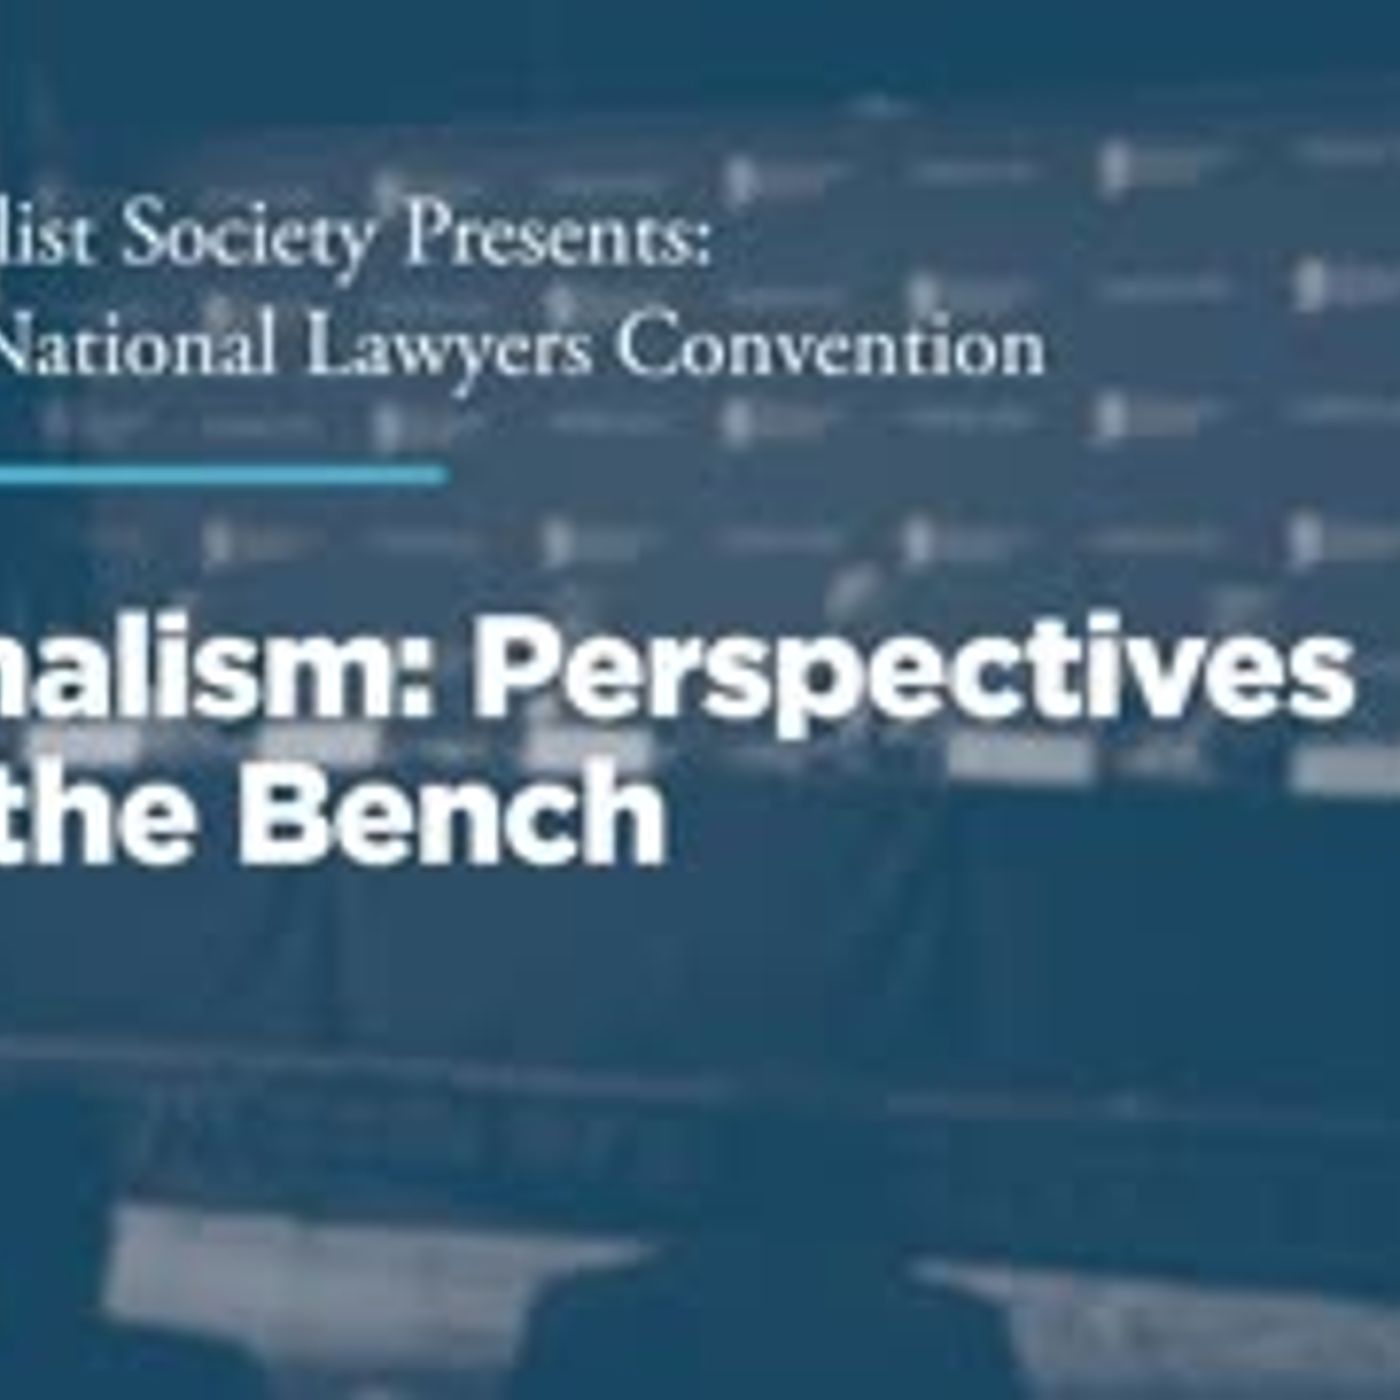 Originalism: Perspectives from the Bench